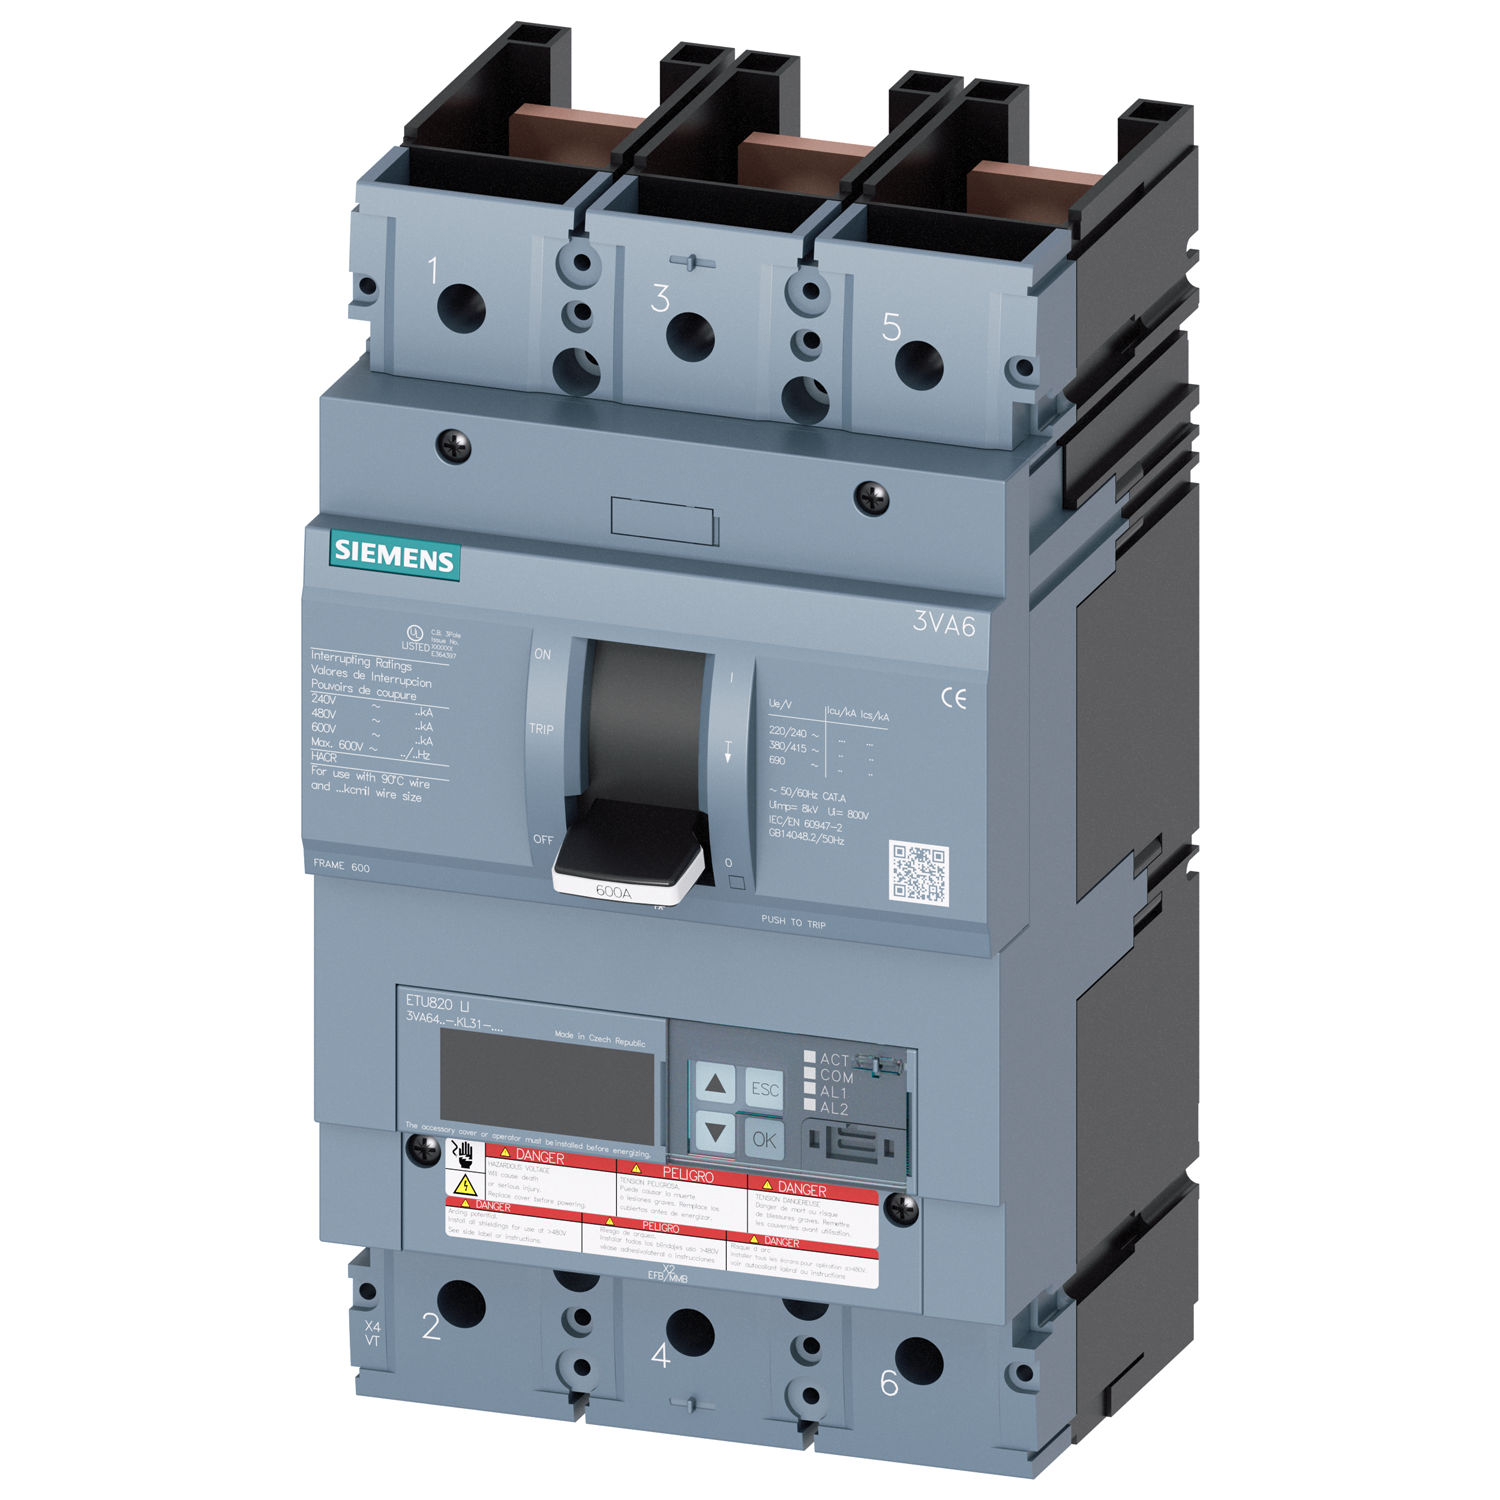 SIEMENS LOW VOLTAGE 3VA UL MOLDED CASE CIRCUIT BREAKER WITH ELECTRONIC TRIP UNIT. 3VA64 FRAME WITH HIGH (CLASS H) BREAKING CAPACITY. 400A 3-POLE (22KAIC AT 600V) (65KAIC AT 480V). ETU820 TRIP UNIT LCD LI WITH METERING. SPECIAL FEATURES WITHOUT LUGS 100 PERCENT RATED. DIMENSIONS (W x H x D) IN 5.4 x 9.8 x 5.4.